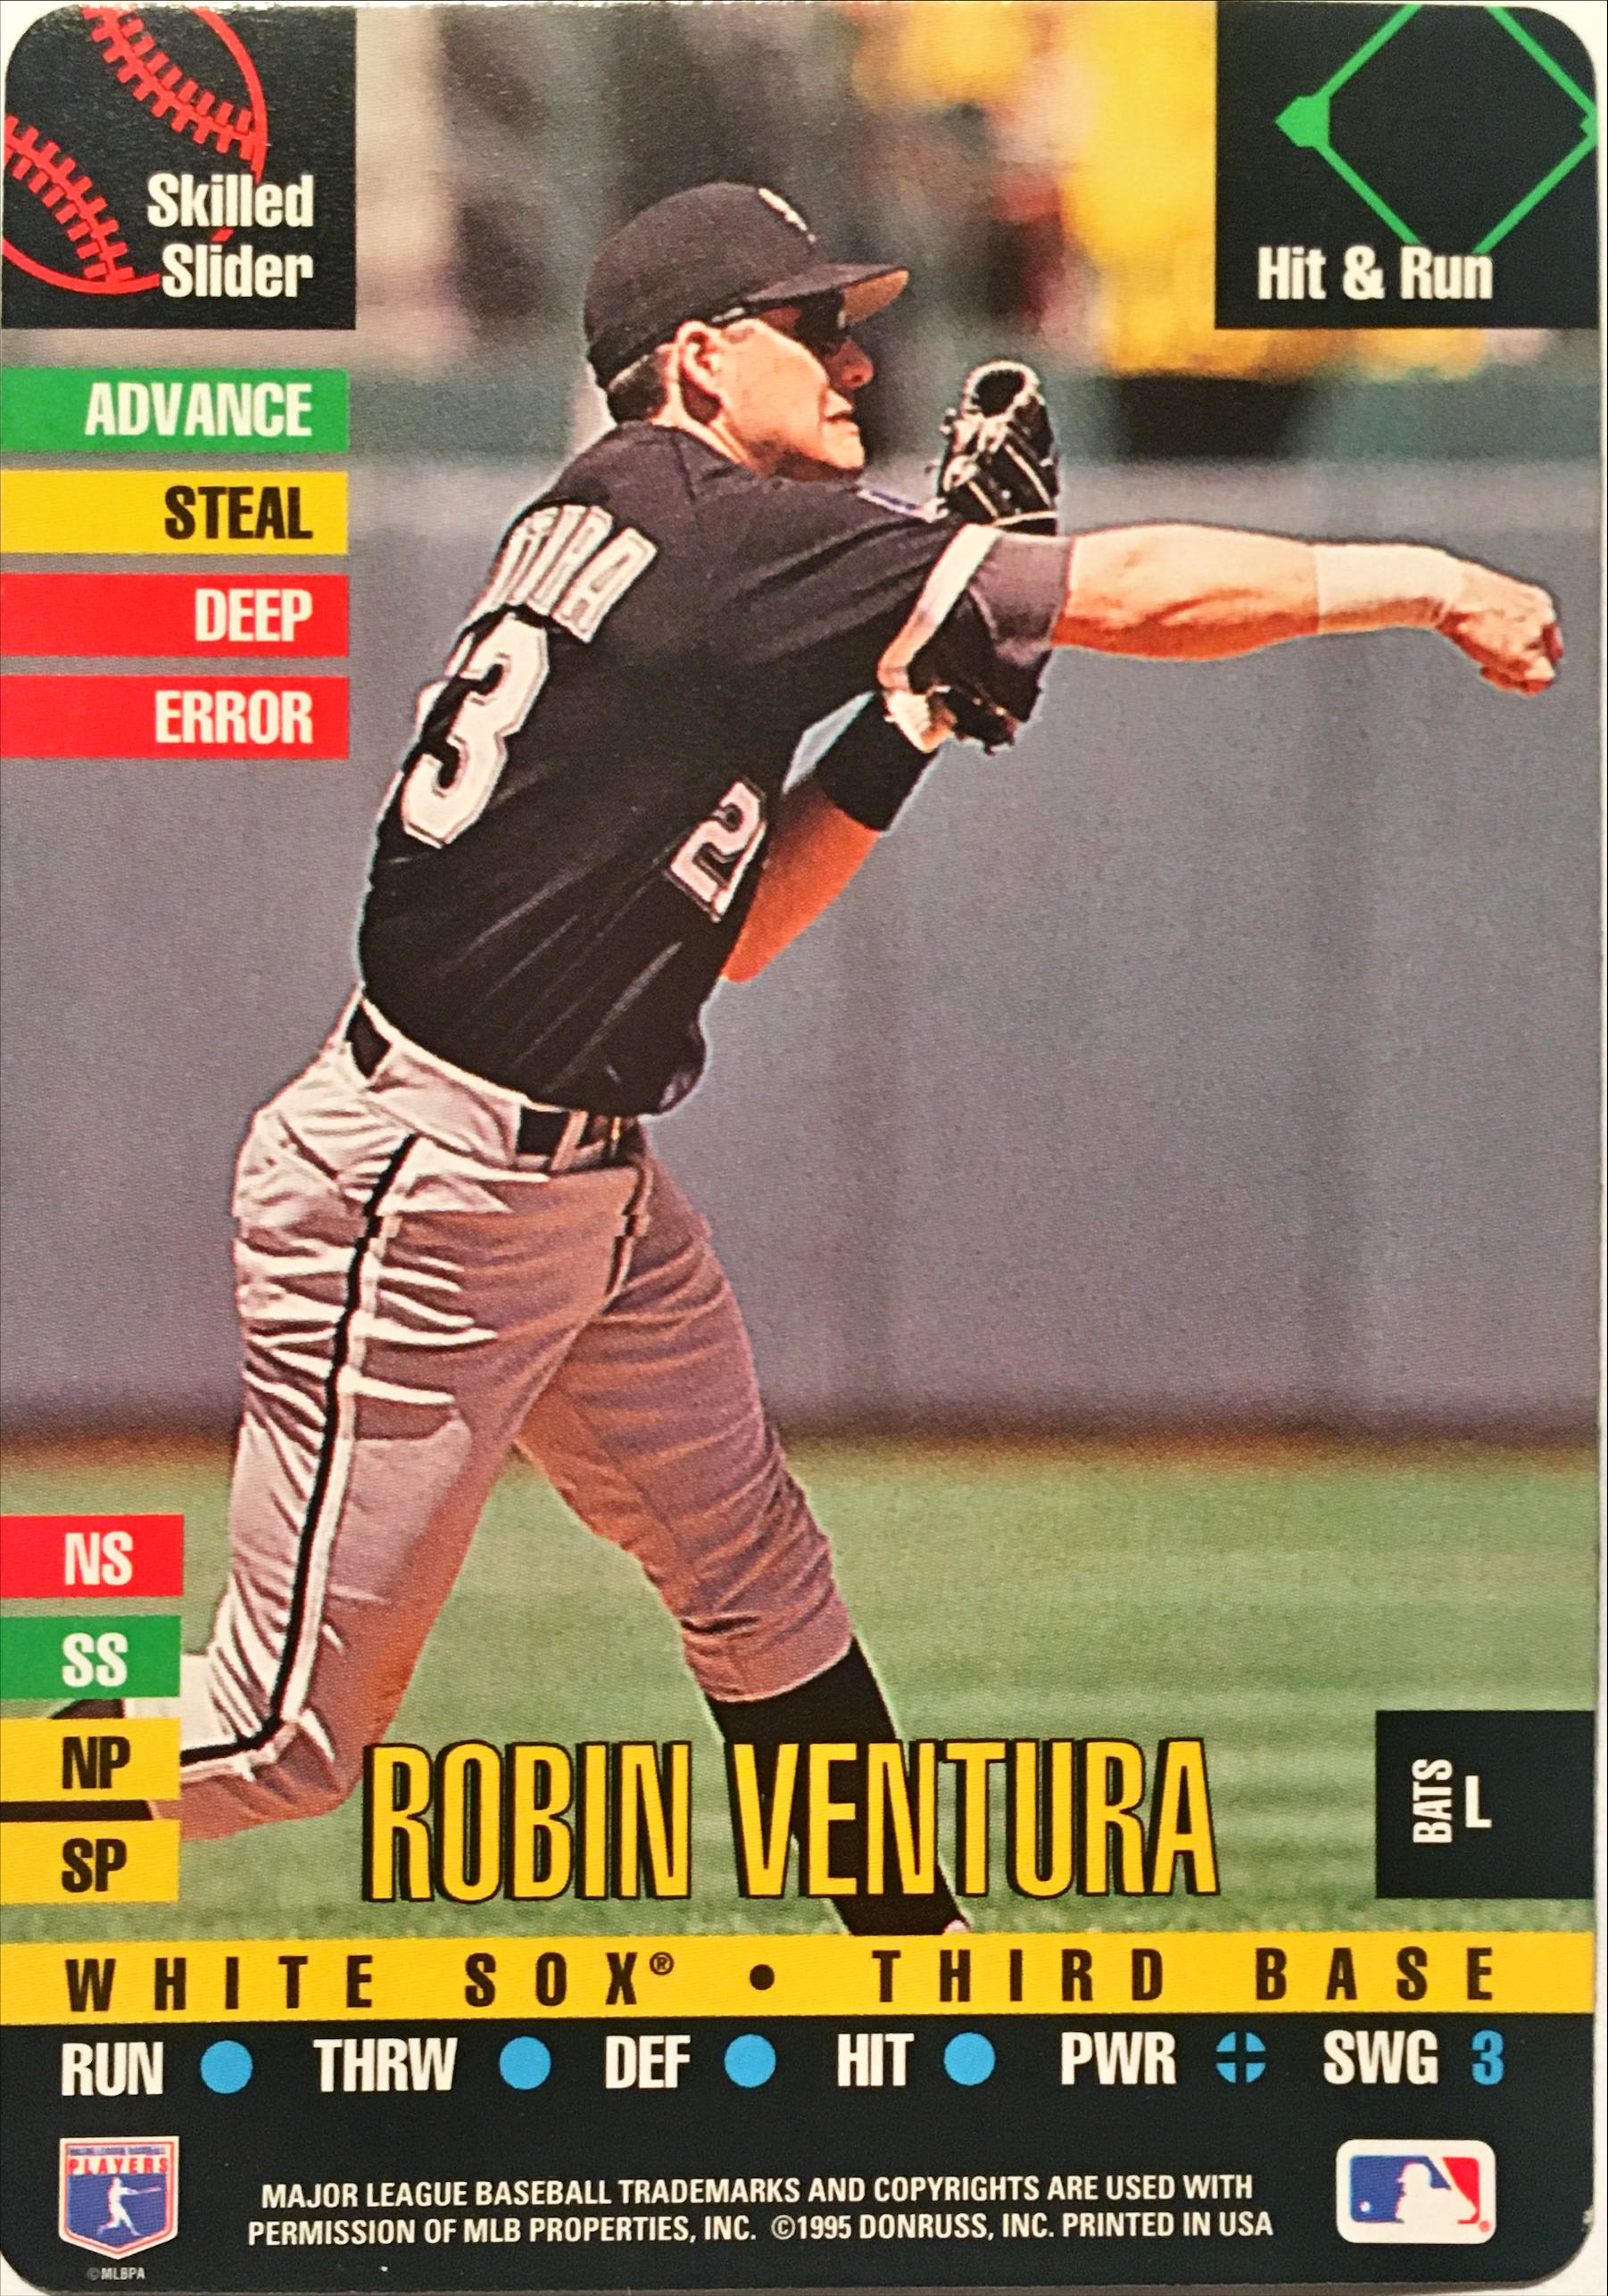 1995 Donruss Top of the Order 55 front image